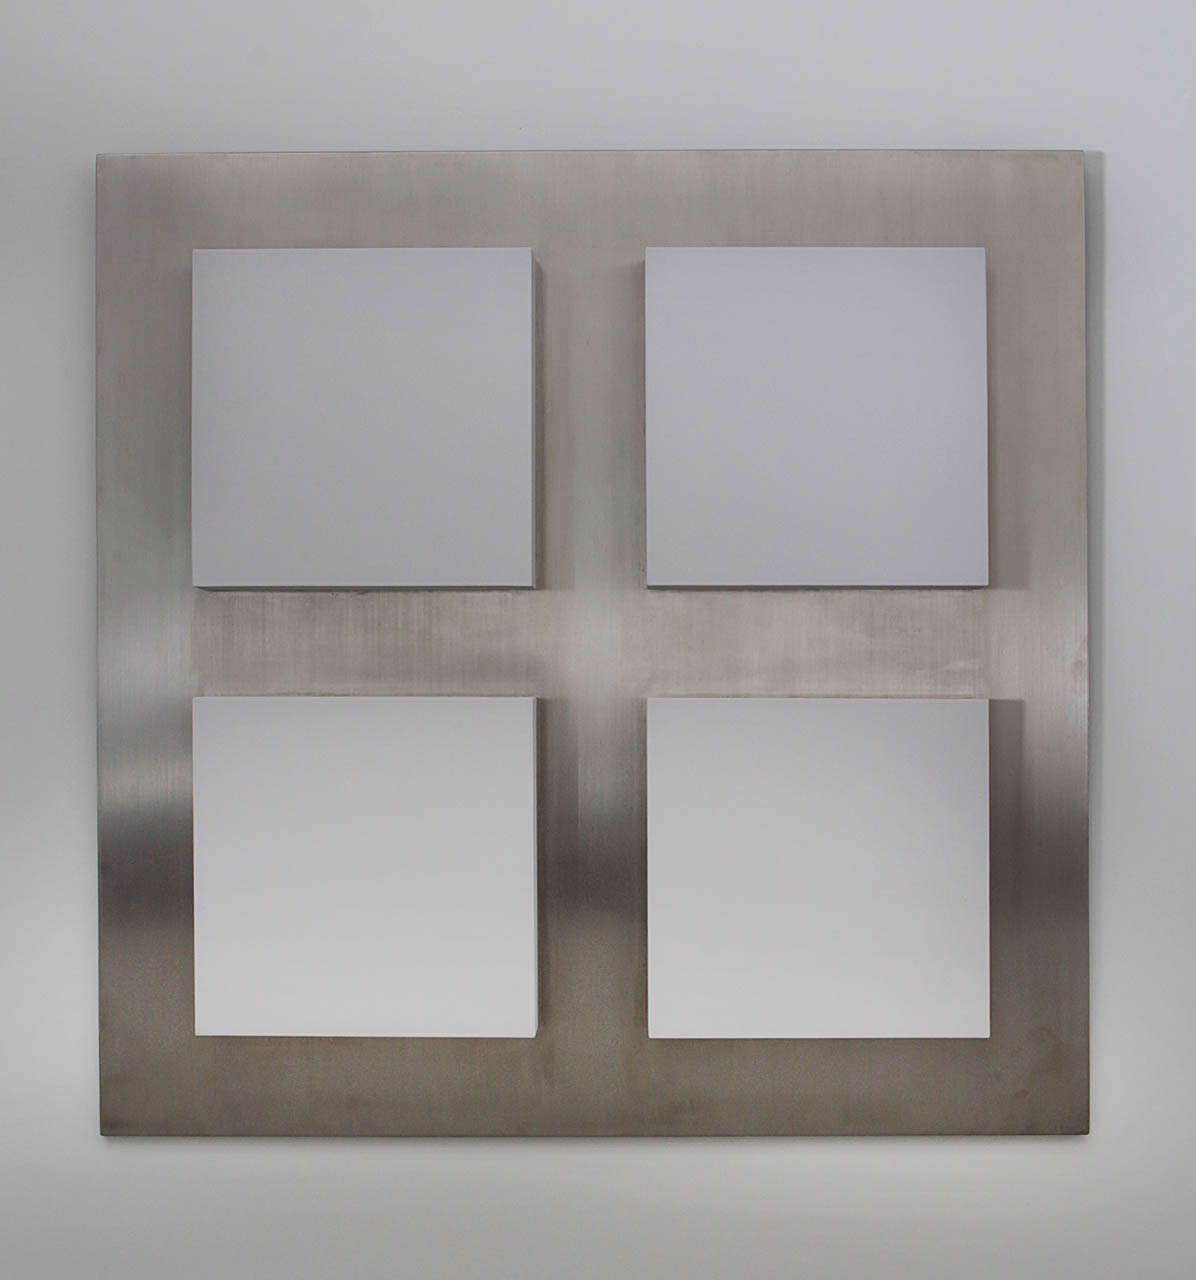 2010 Painted Acrylic on Stainless Steel Orthogonal By Arthur Carter
36